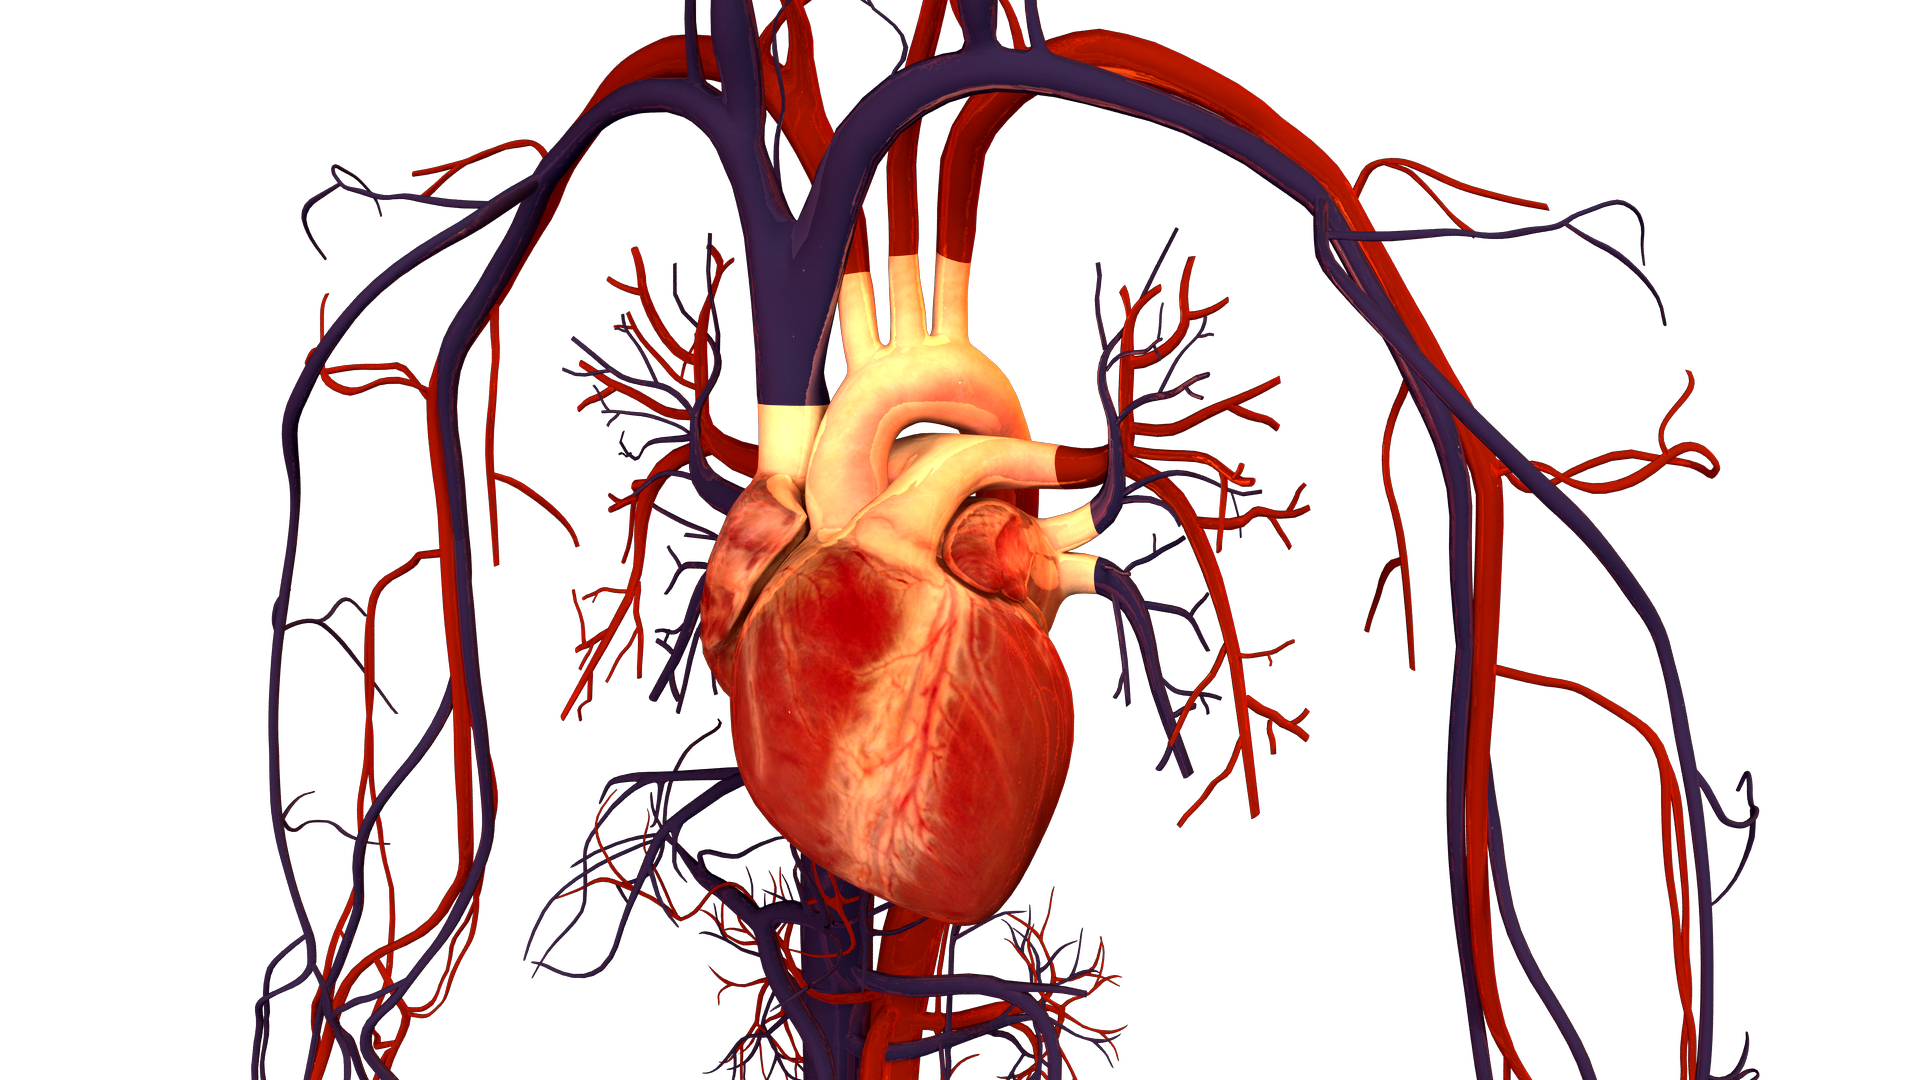 Free Human Heart Image, Download Free Clip Art, Free Clip Art on Clipart Library